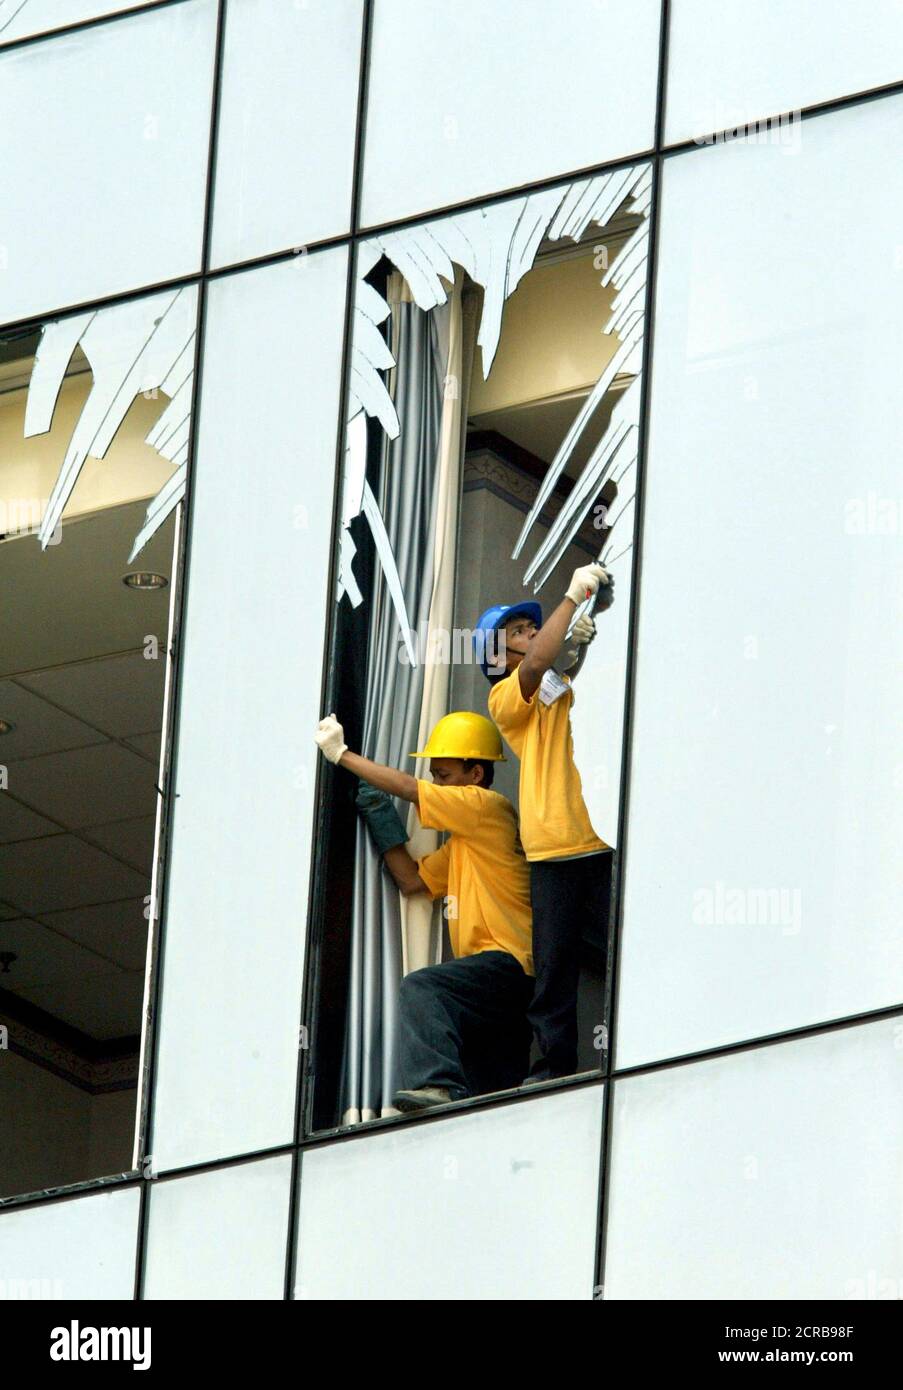 Indonesian workers remove glass shards from a window of the JW Marriot Hotel in Jakarta August 13, 2003. Indonesia will likely strengthen anti-terrorism regulations to prevent more attacks such as last week's bomb blast at the hotel that killed more than 10 people, but will not copy draconian security laws used by its neighbours, an official said on Wednesday. REUTERS/Beawiharta  EN/FA Stock Photo